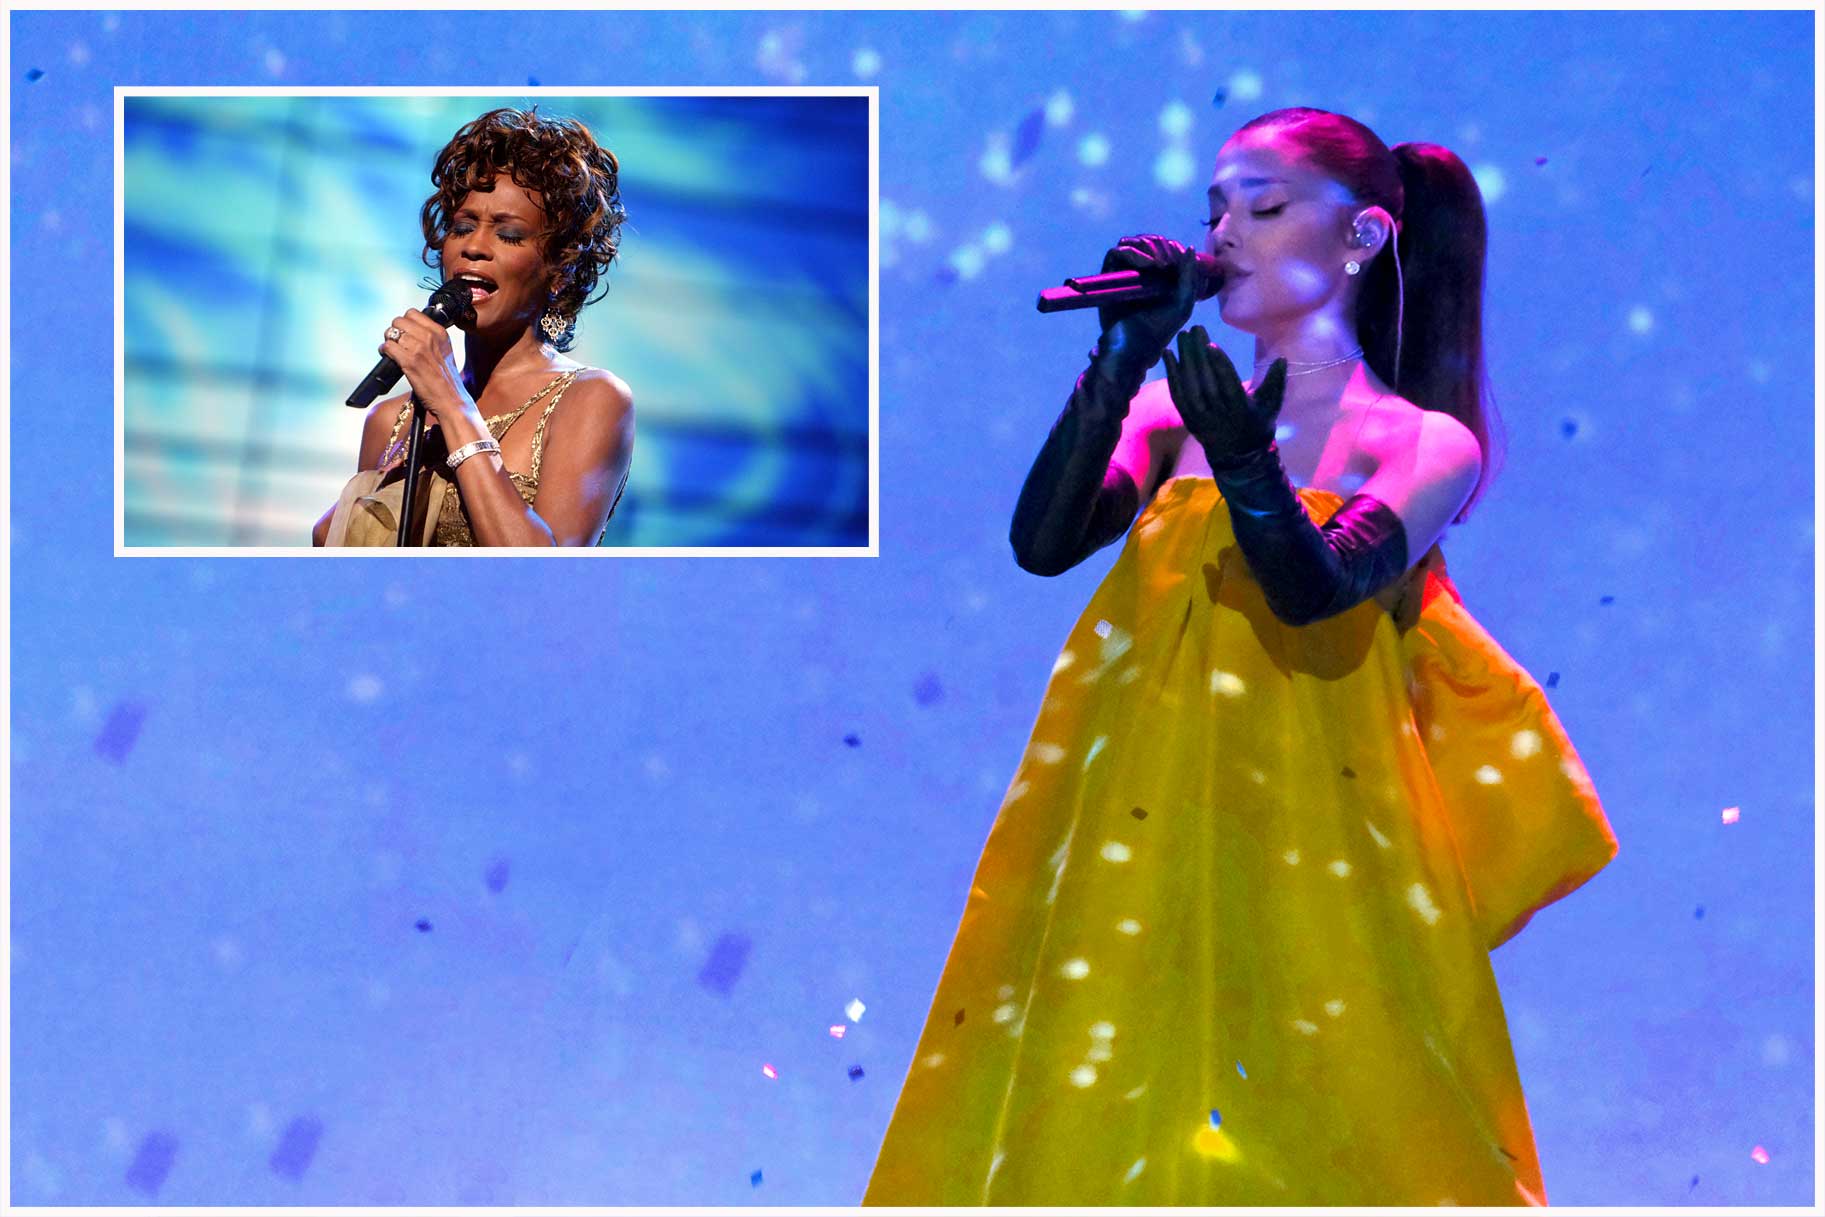 Ariana Grande sings Whitney Houston's 'I Have Nothing' during